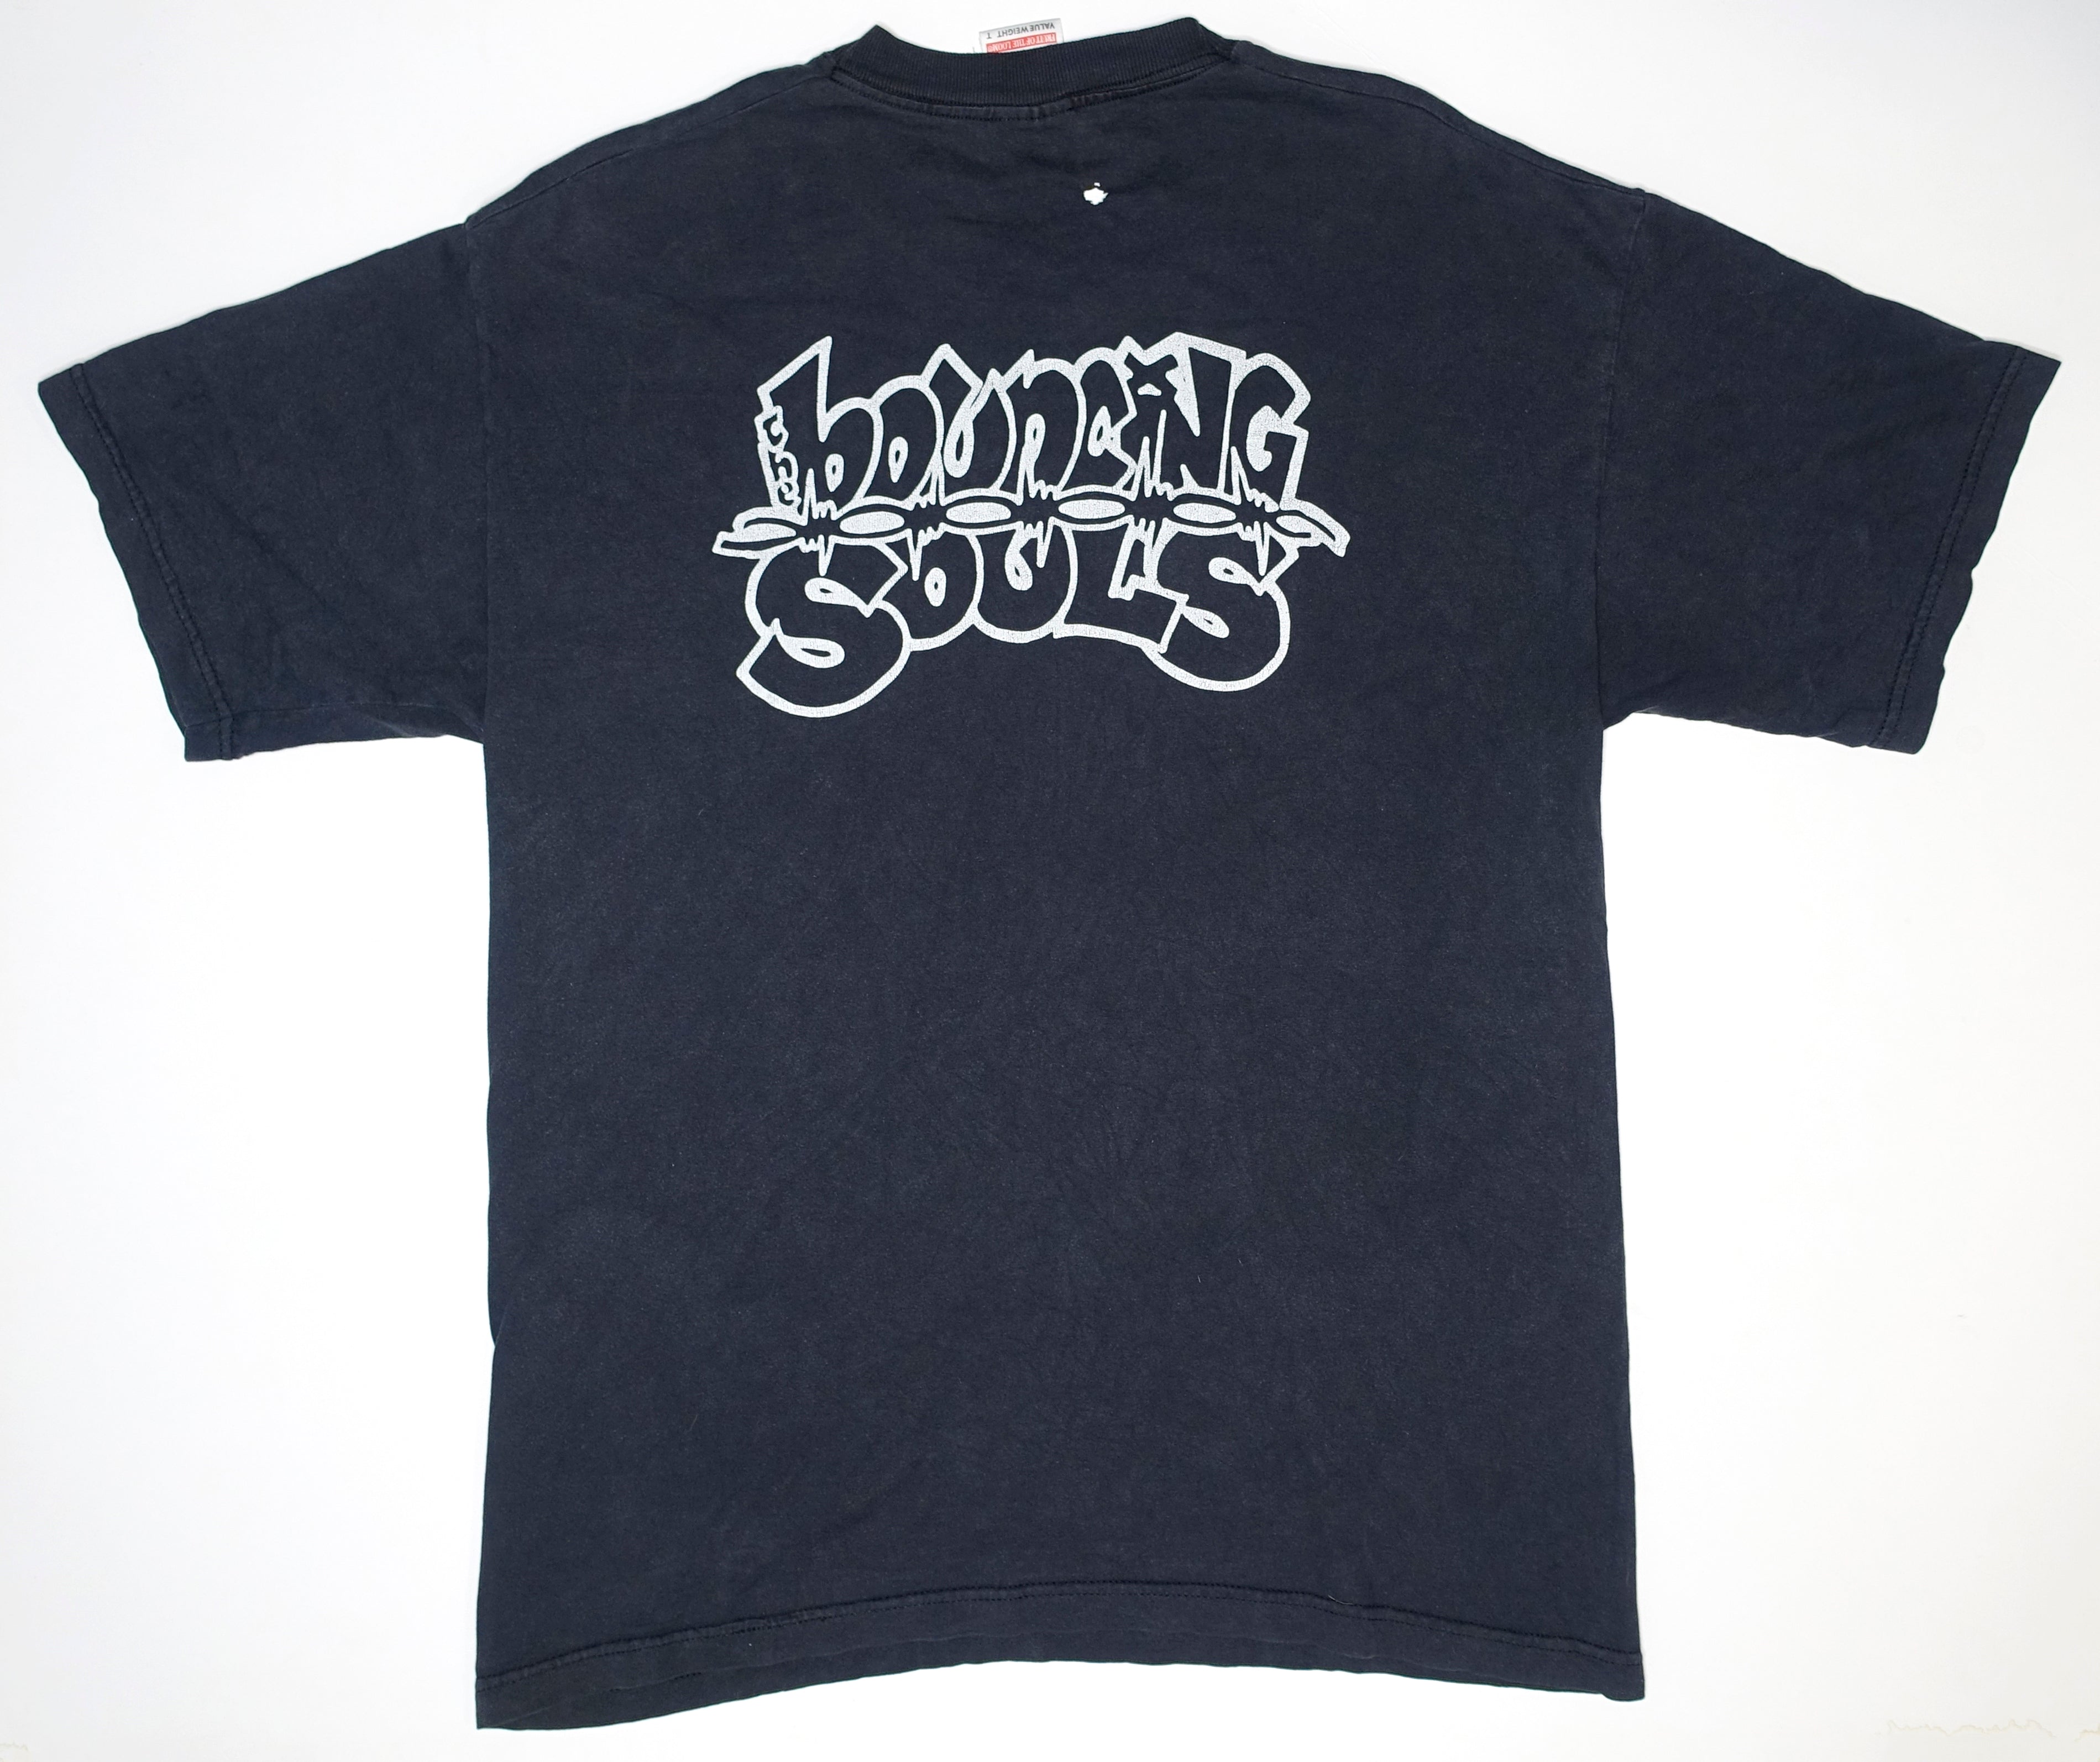 Bouncing Souls – Cross Bones And Barb Wire 90's Tour Shirt Size Large